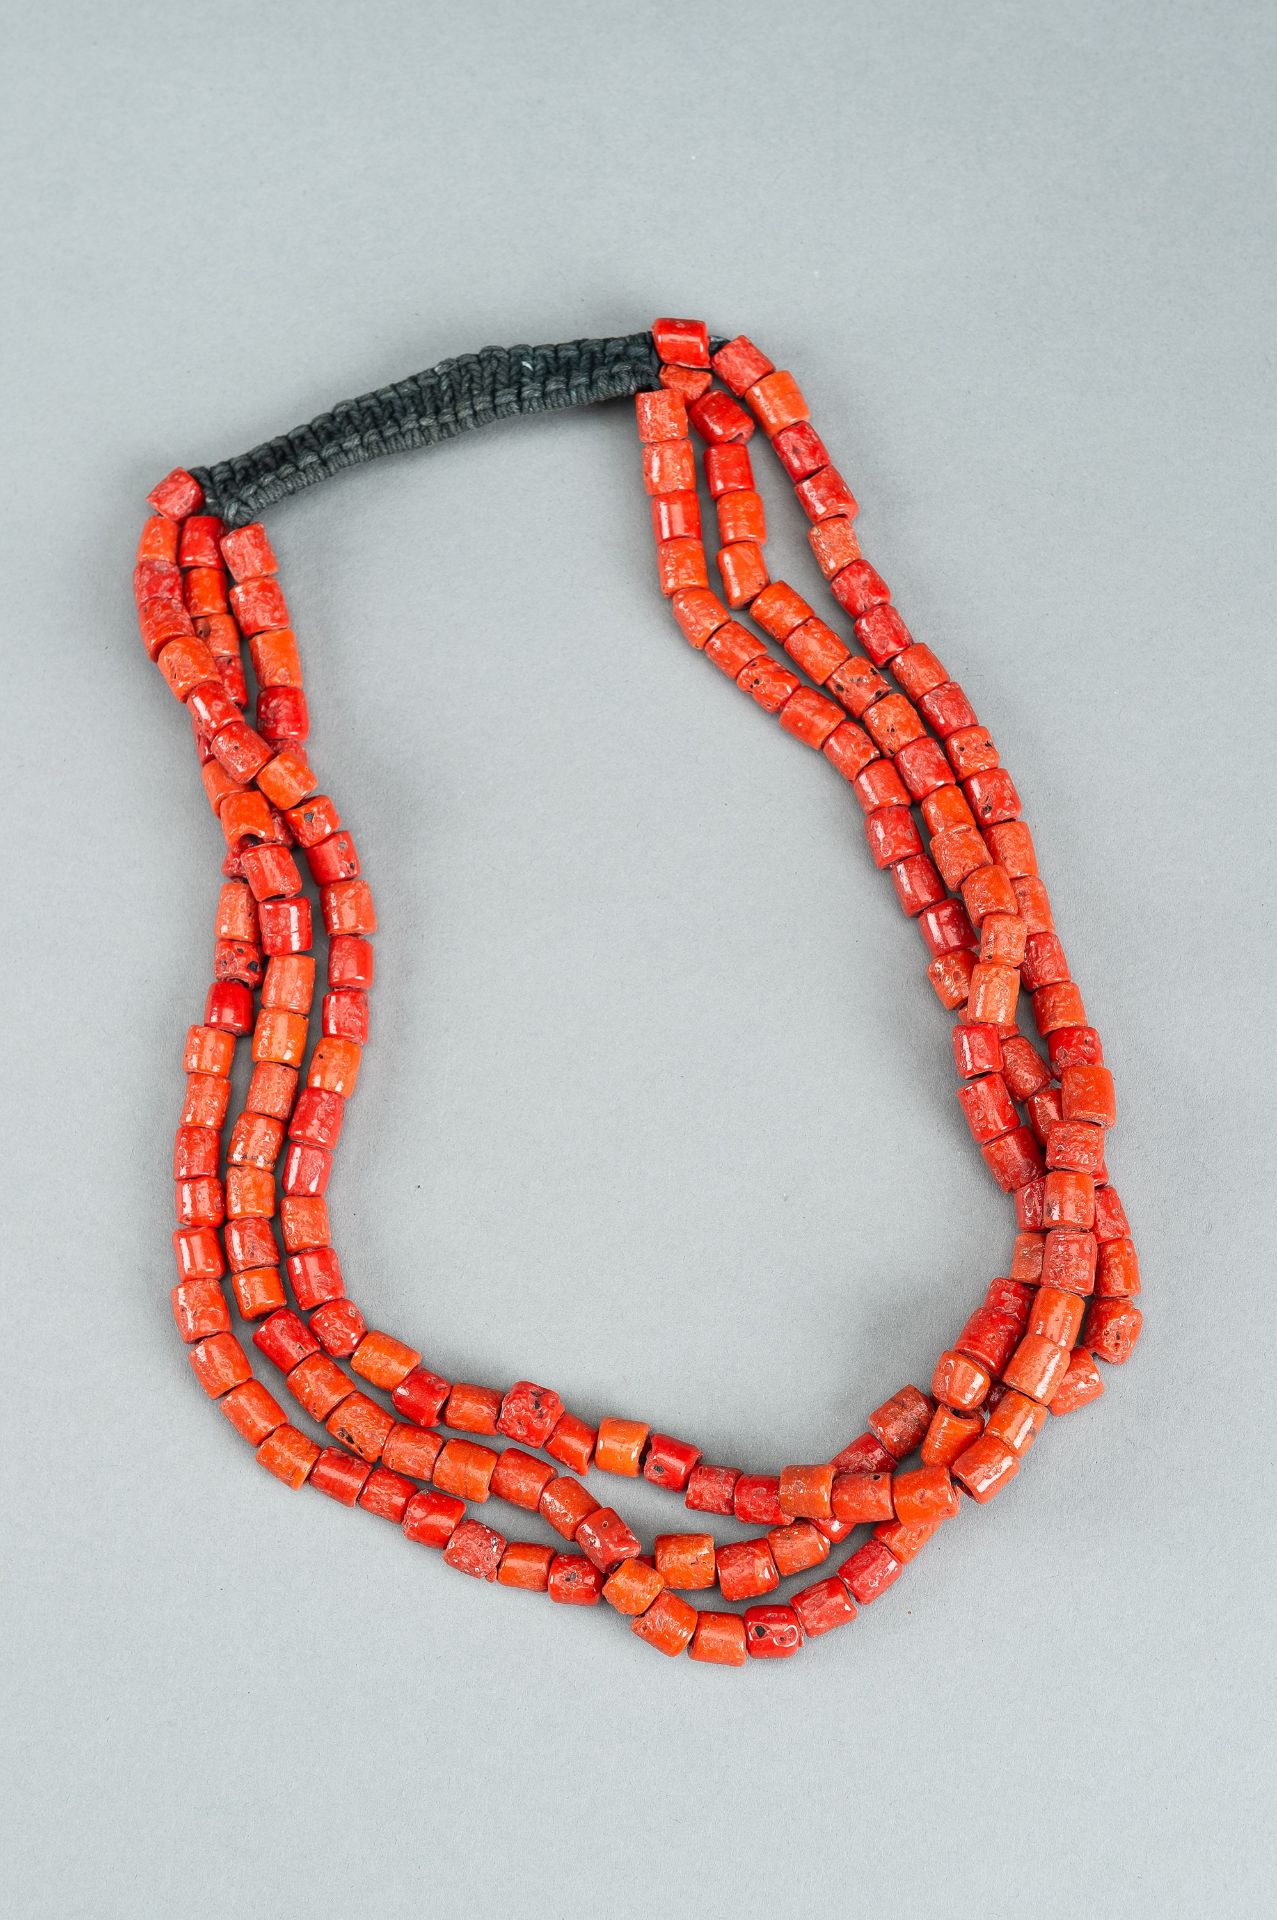 A NAGALAND 'CORAL' GLASS NECKLACE, c. 1900s - Image 8 of 9